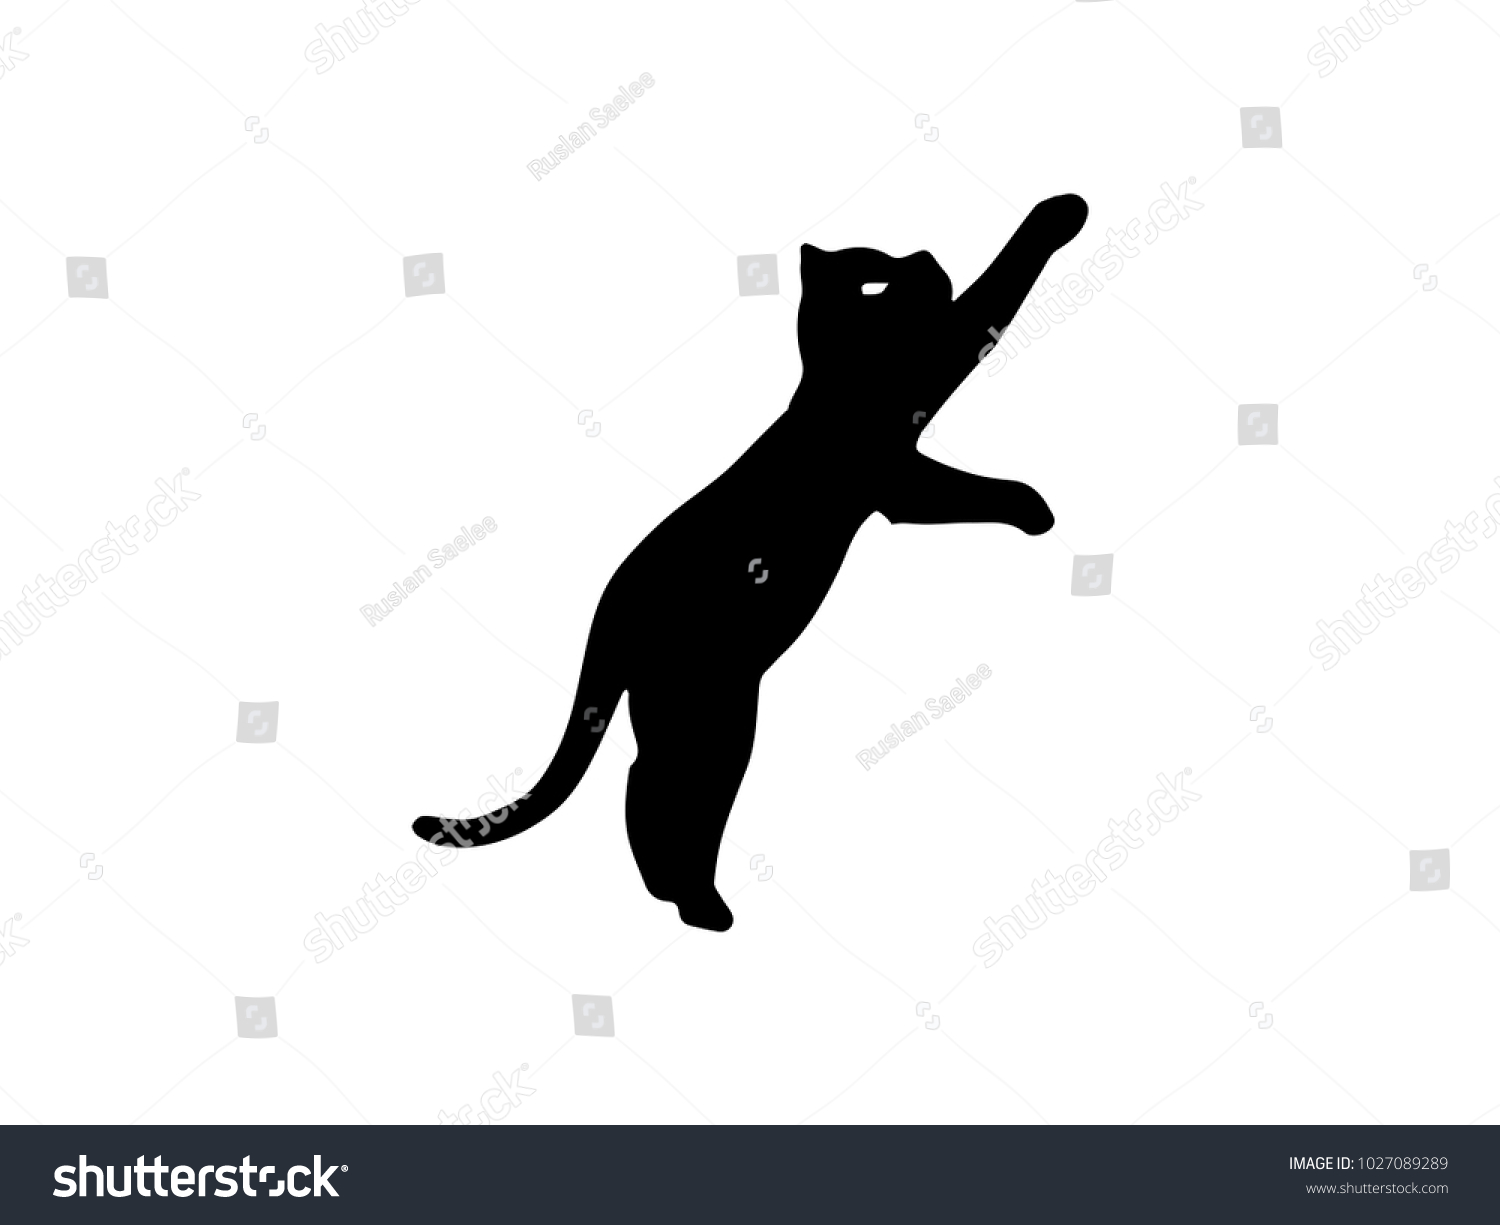 Cat logo black isolate on white background. Cat vector template concept illustration. #1027089289